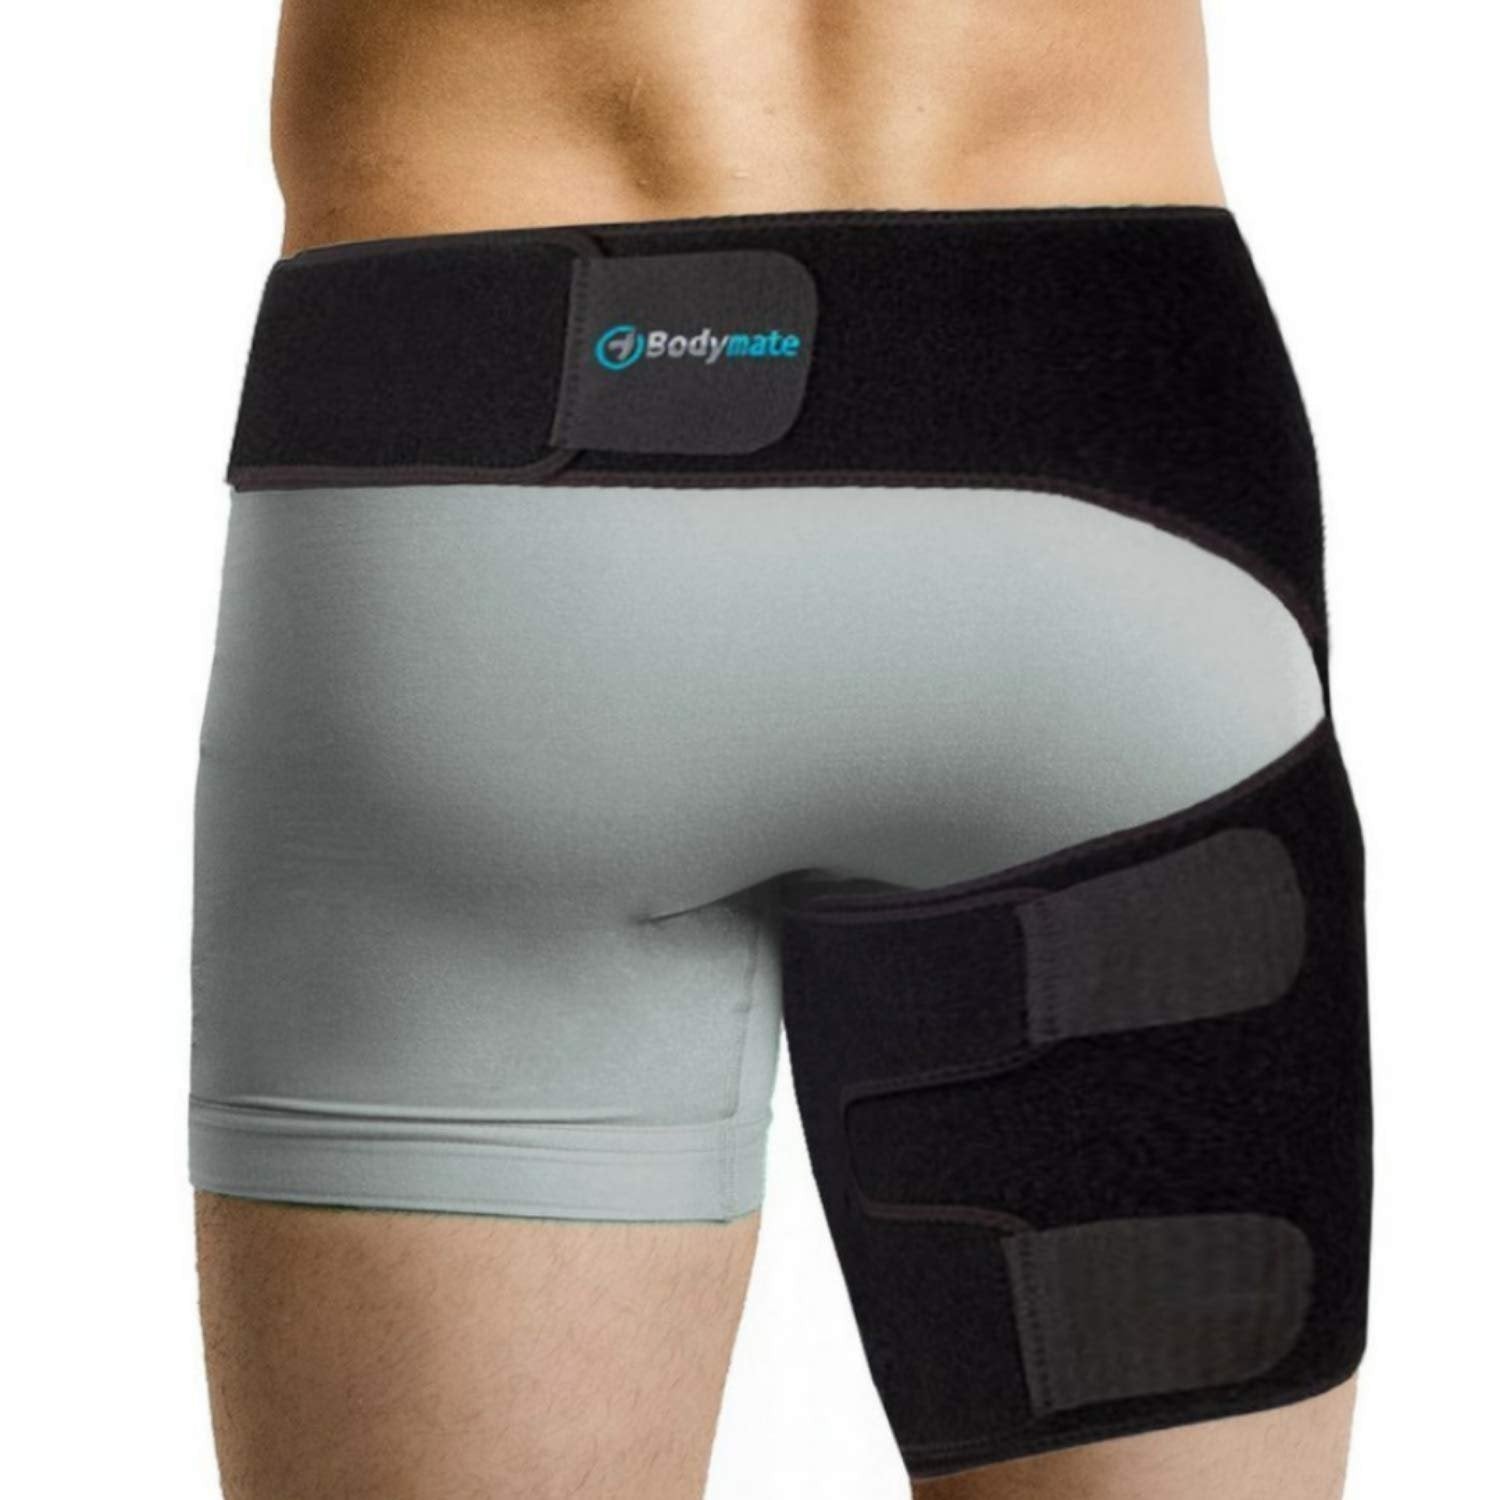 Bodymate Compression Brace Black for Hip & Thigh Pain Relief - Size M (32-44) - Free Ship